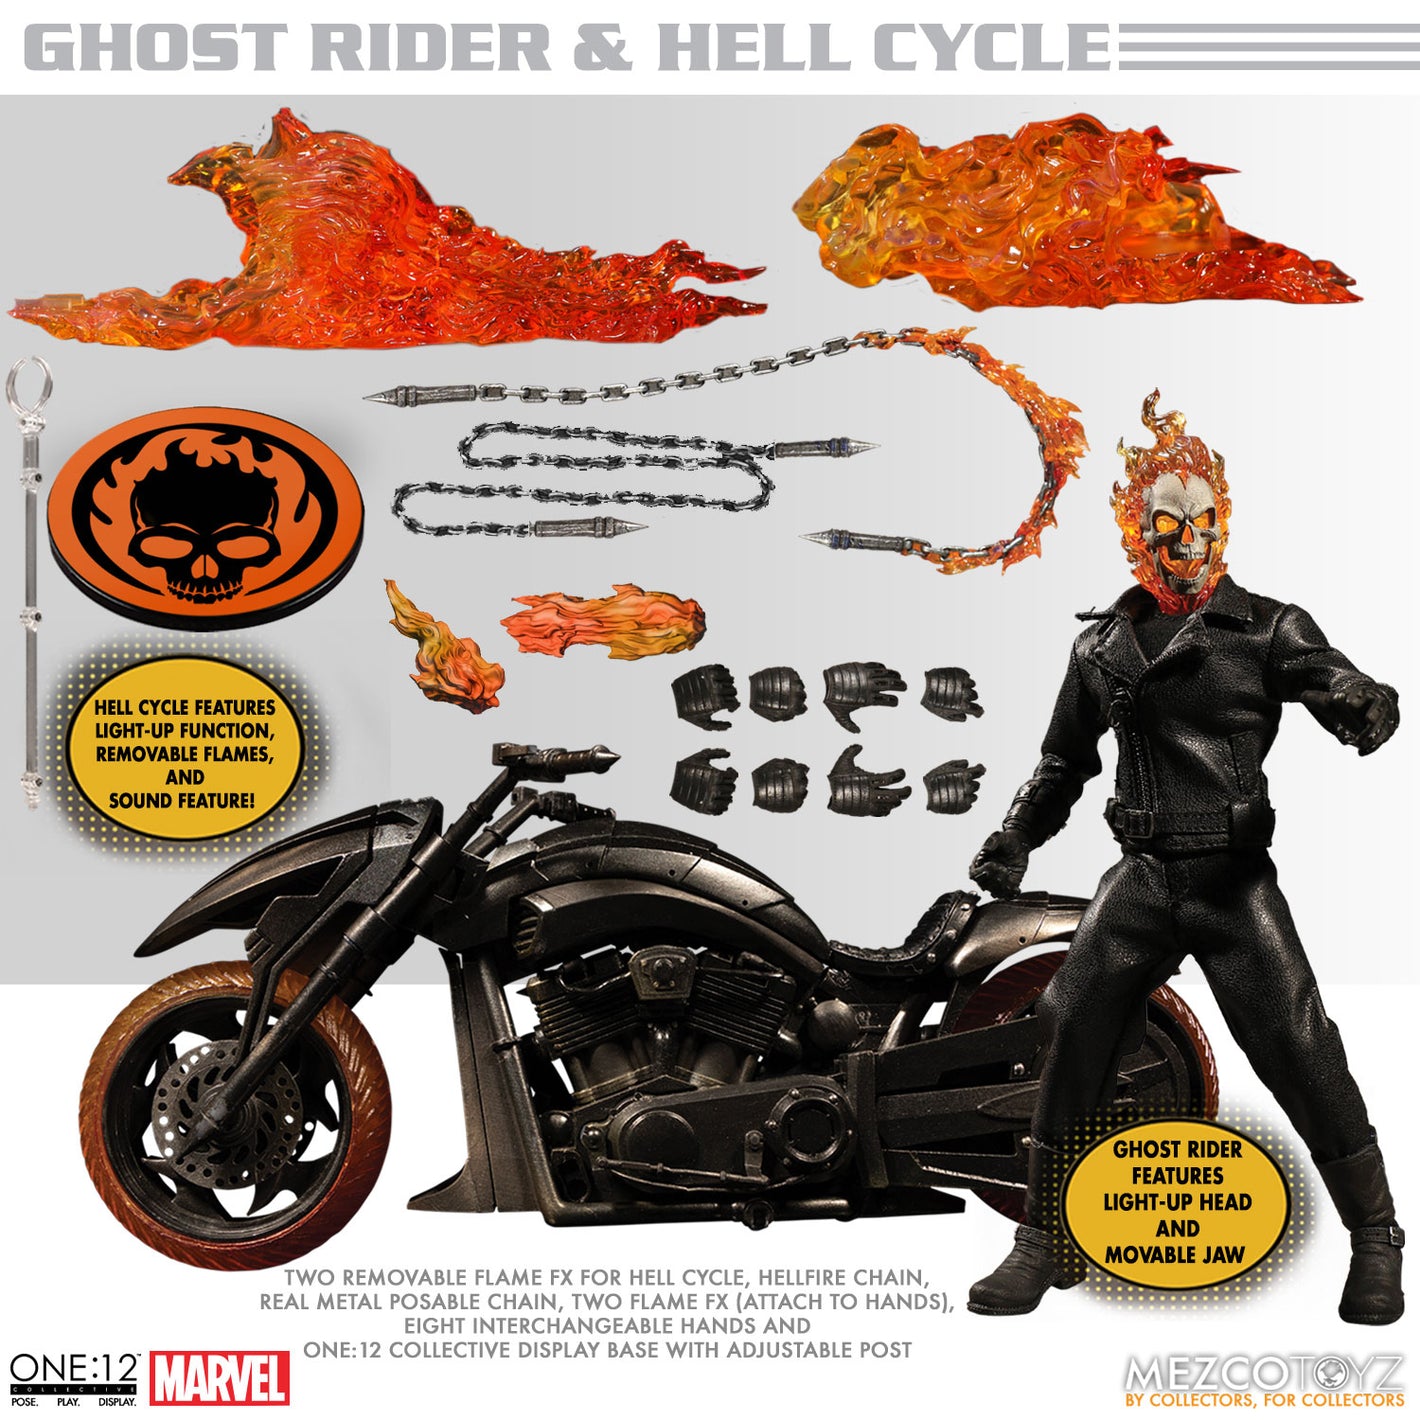 MEZCO ONE:12 - GHOST RIDER & HELL CYCLE